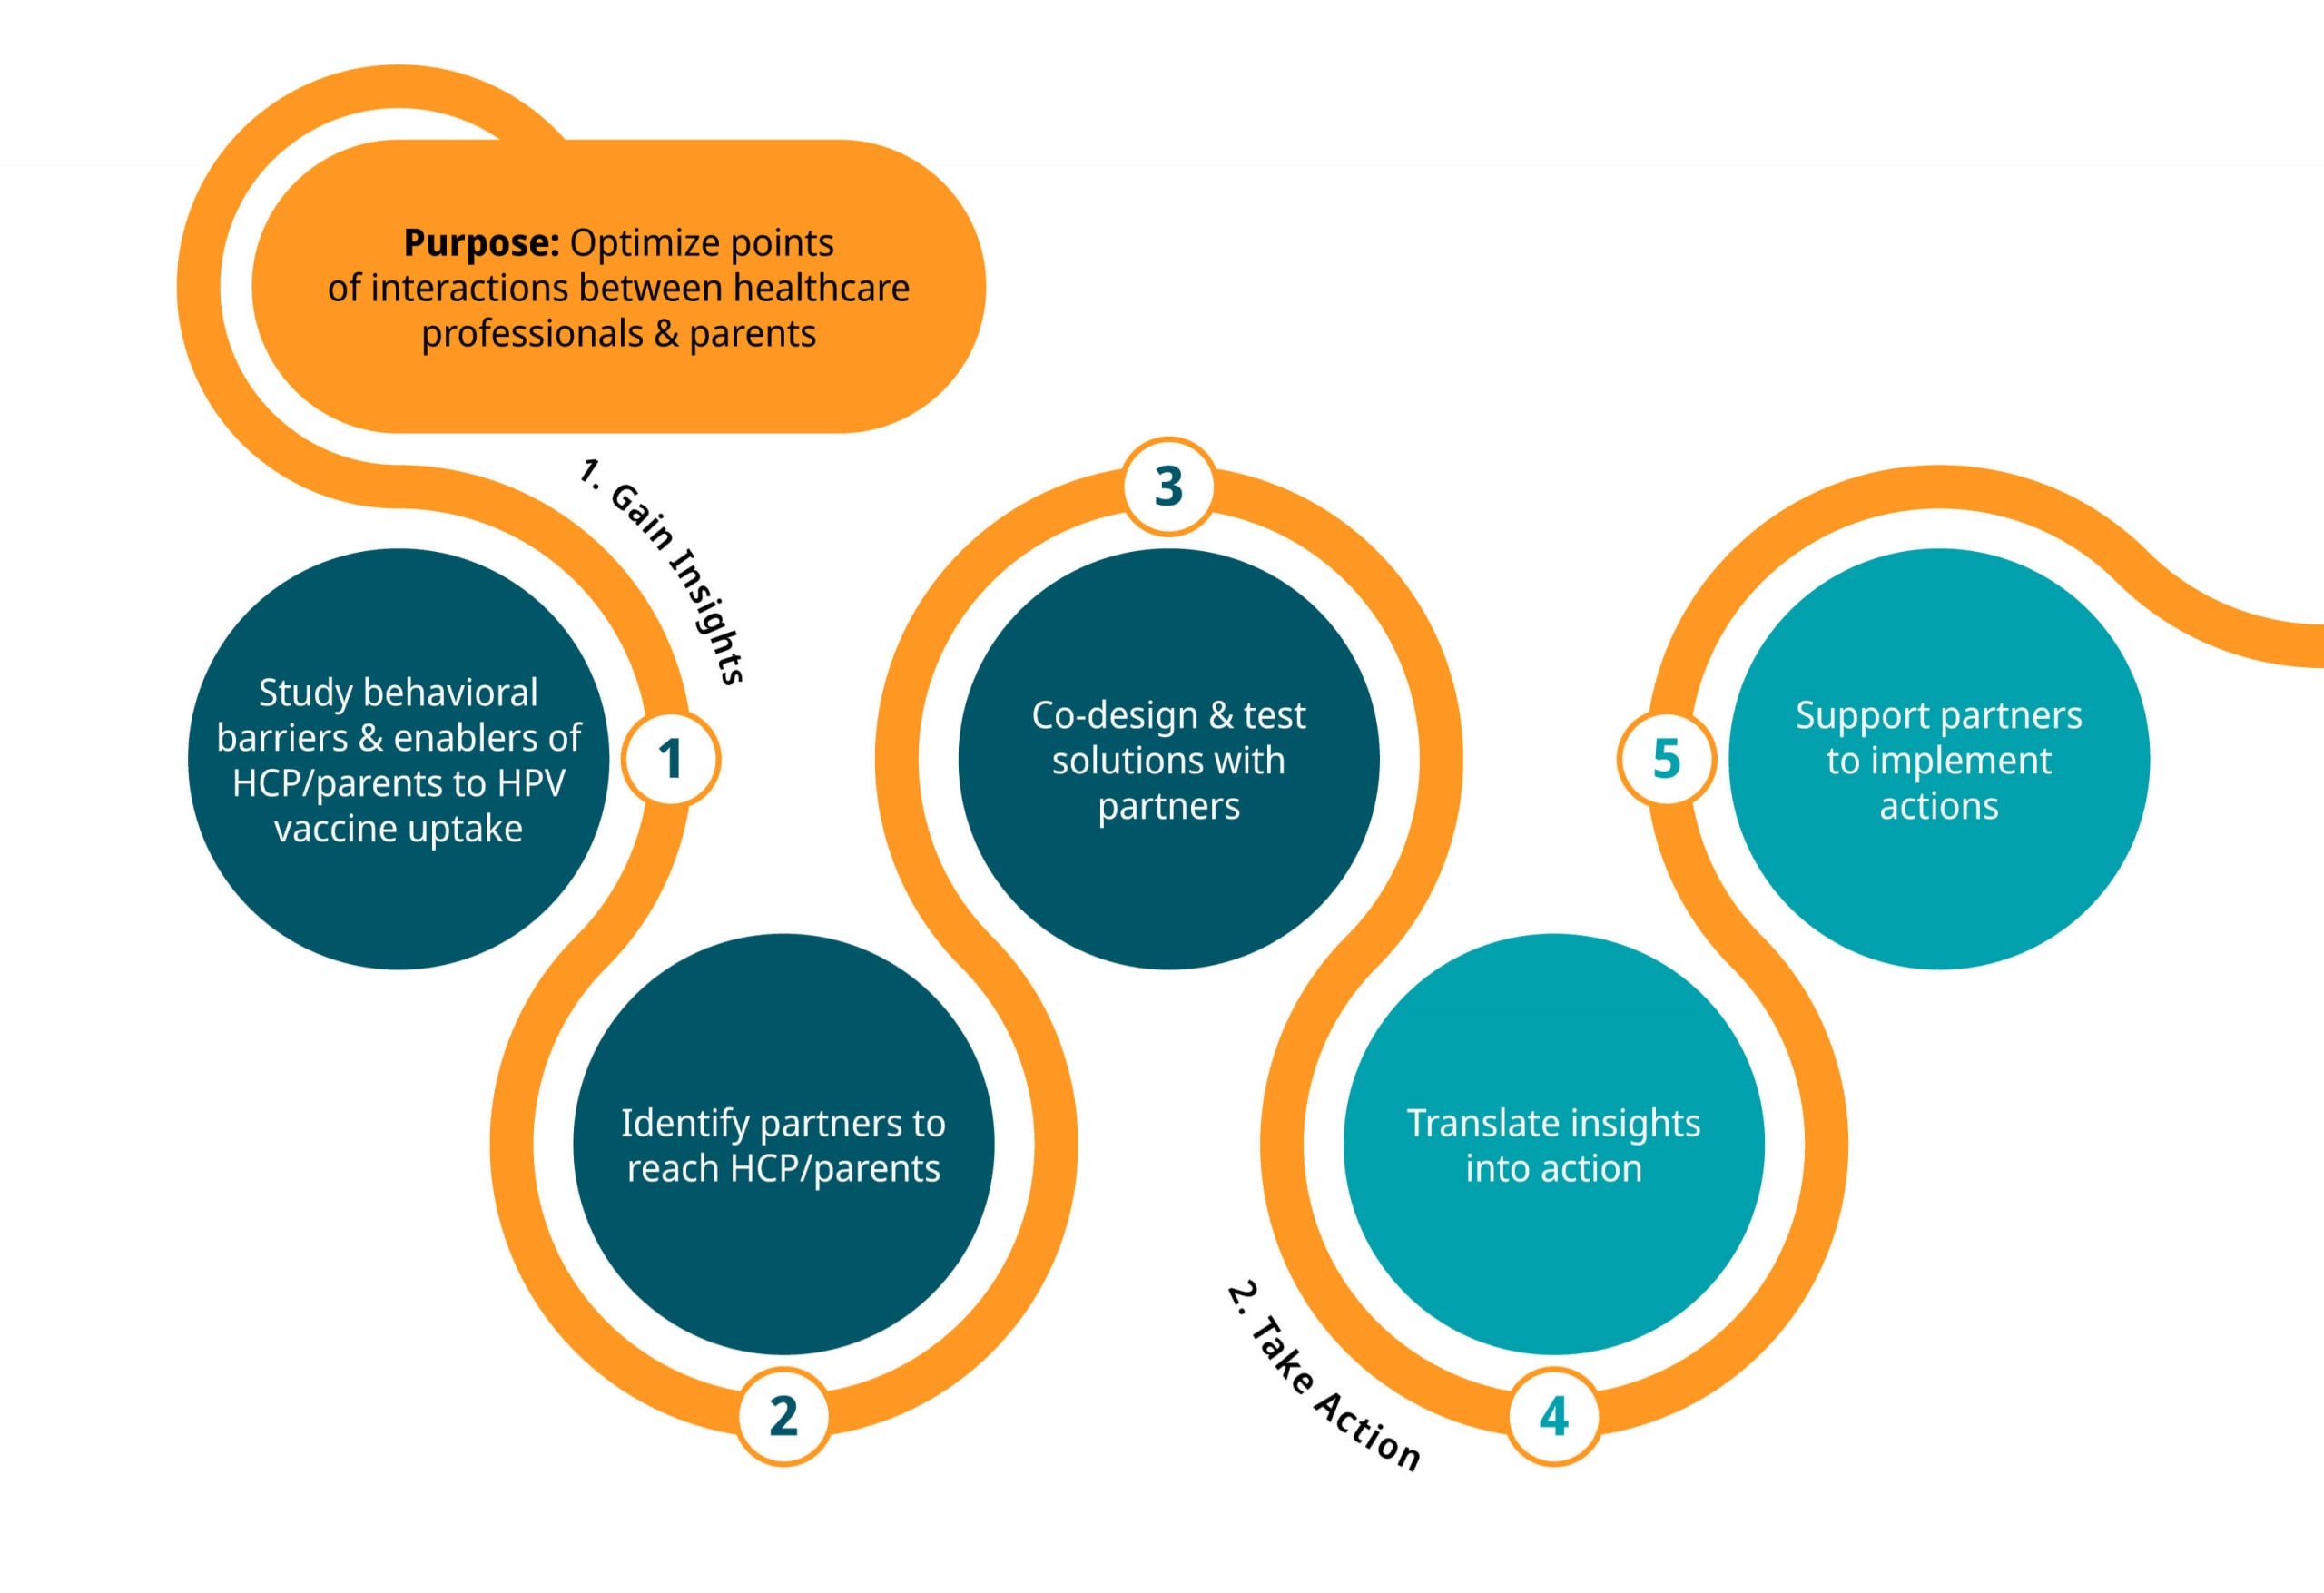 A diagram outlining the research process, starting with the Purpose: Optimize points of interactions between healthcare professionals & parents. A line connects the purpose and wraps around the main points, starting with gaining insights and continuing to take action. The main points are: 1 Study behavioral barriers & enablers of HCP/parents to HPV vaccine uptake. 2 Identify partners to reach HCP/parents. 3 Co-design & test solutions with partners. 4 Translate insights into action. 5 Support partners to implement actions.